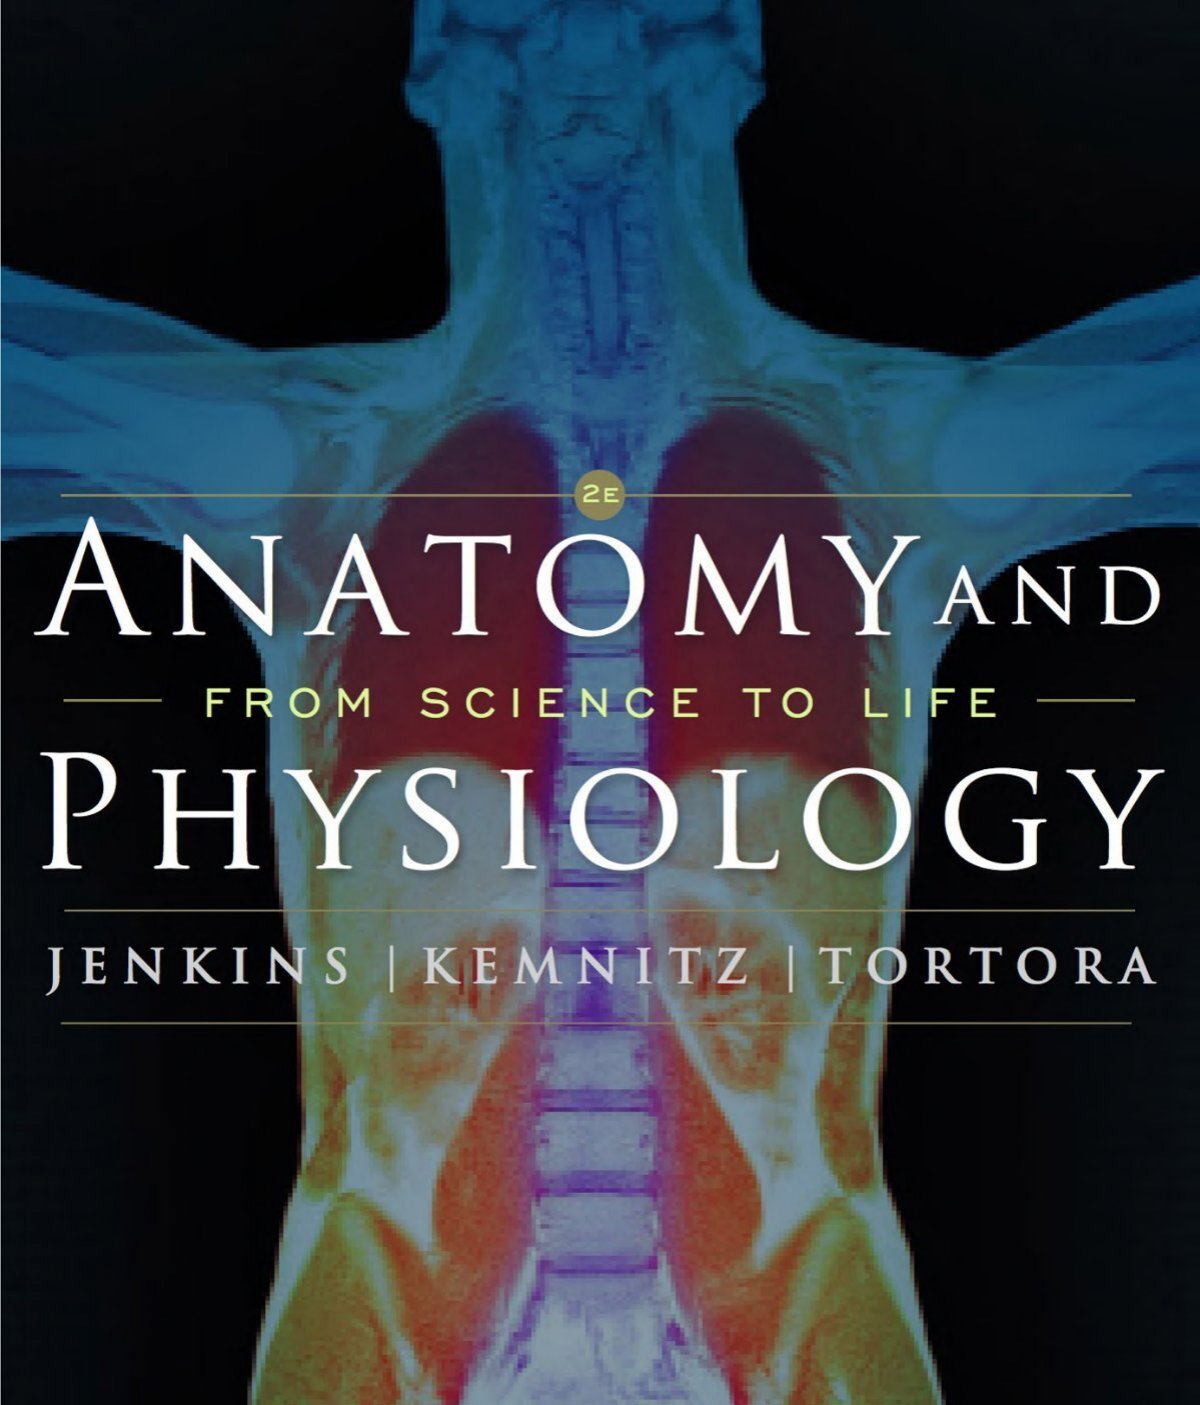 Anatomy and physiology from science to life GW Jenkins 2e - 2010